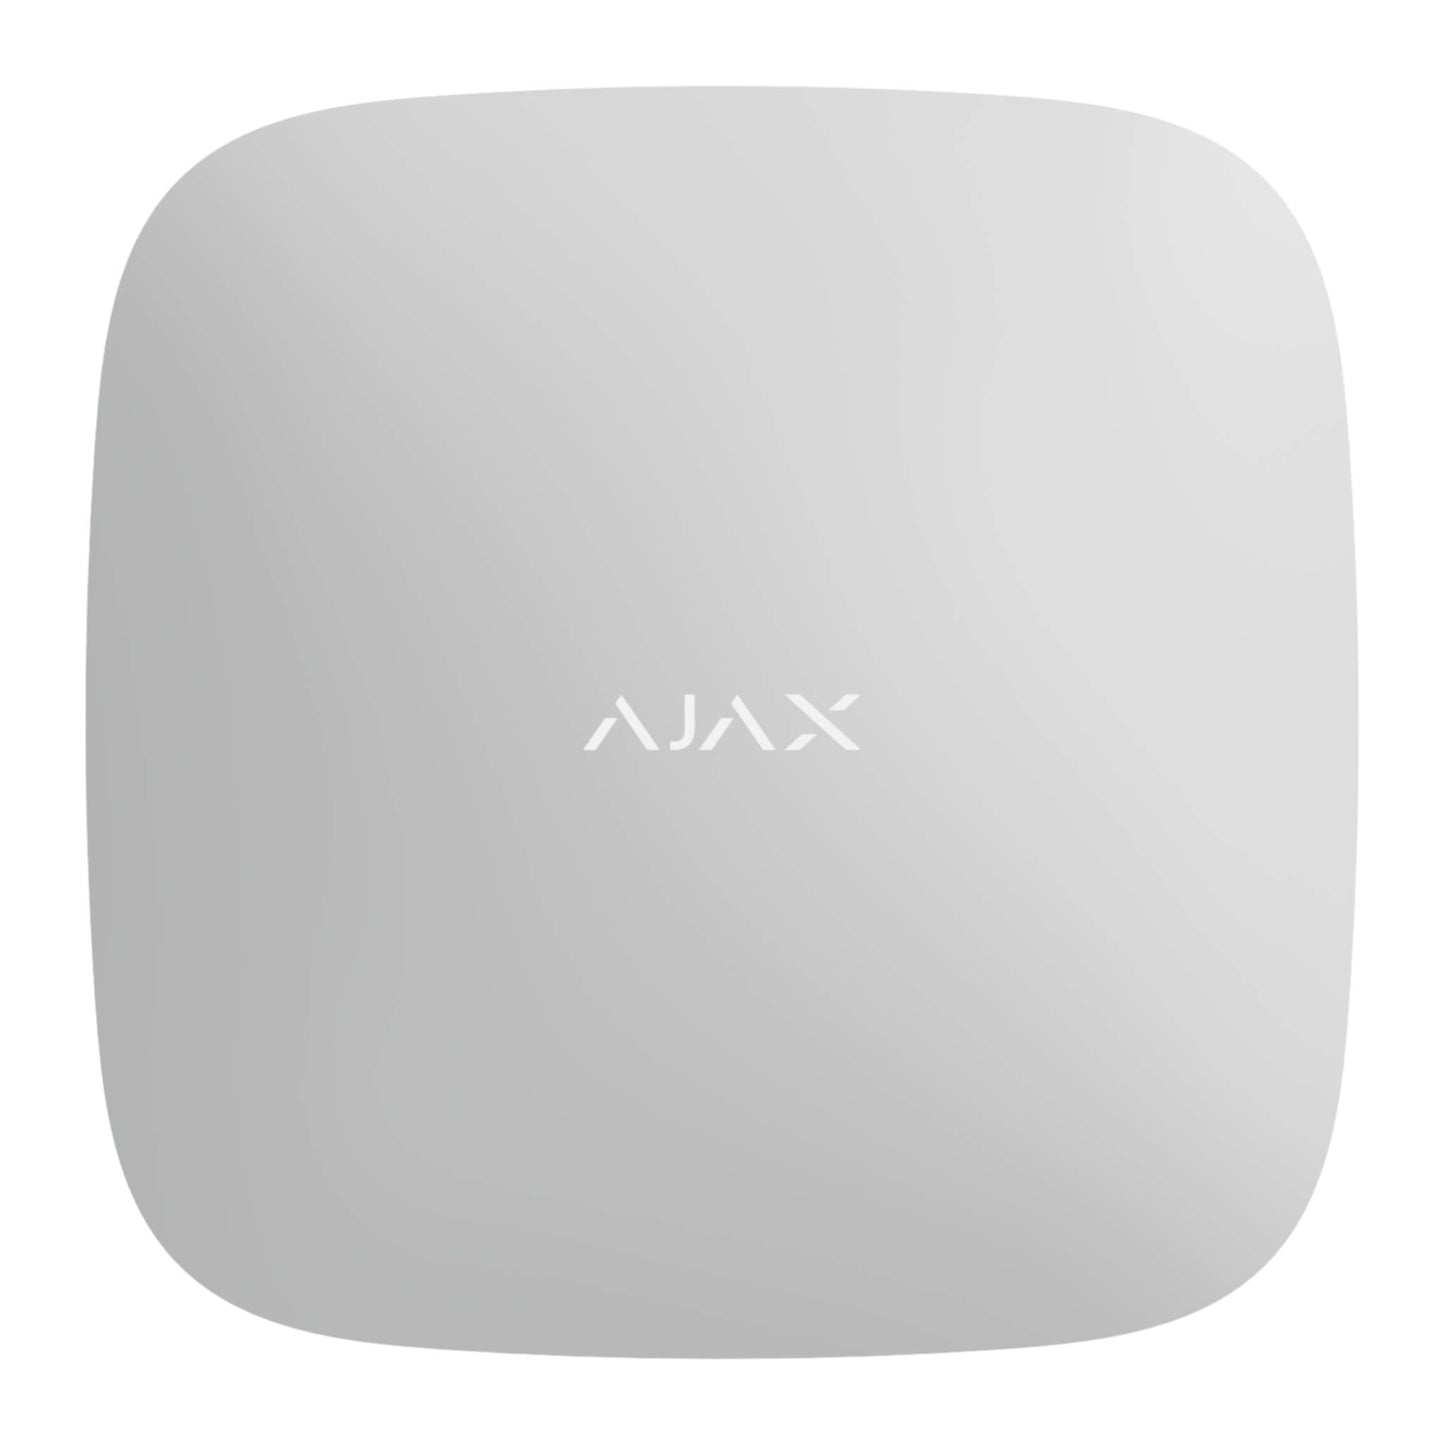 White hub plus control panel from ajax security systems , with wifi and  ethernet connection , device is 163 × 163 × 36 mm in size and 350grams in weight, front view pf Hub 2